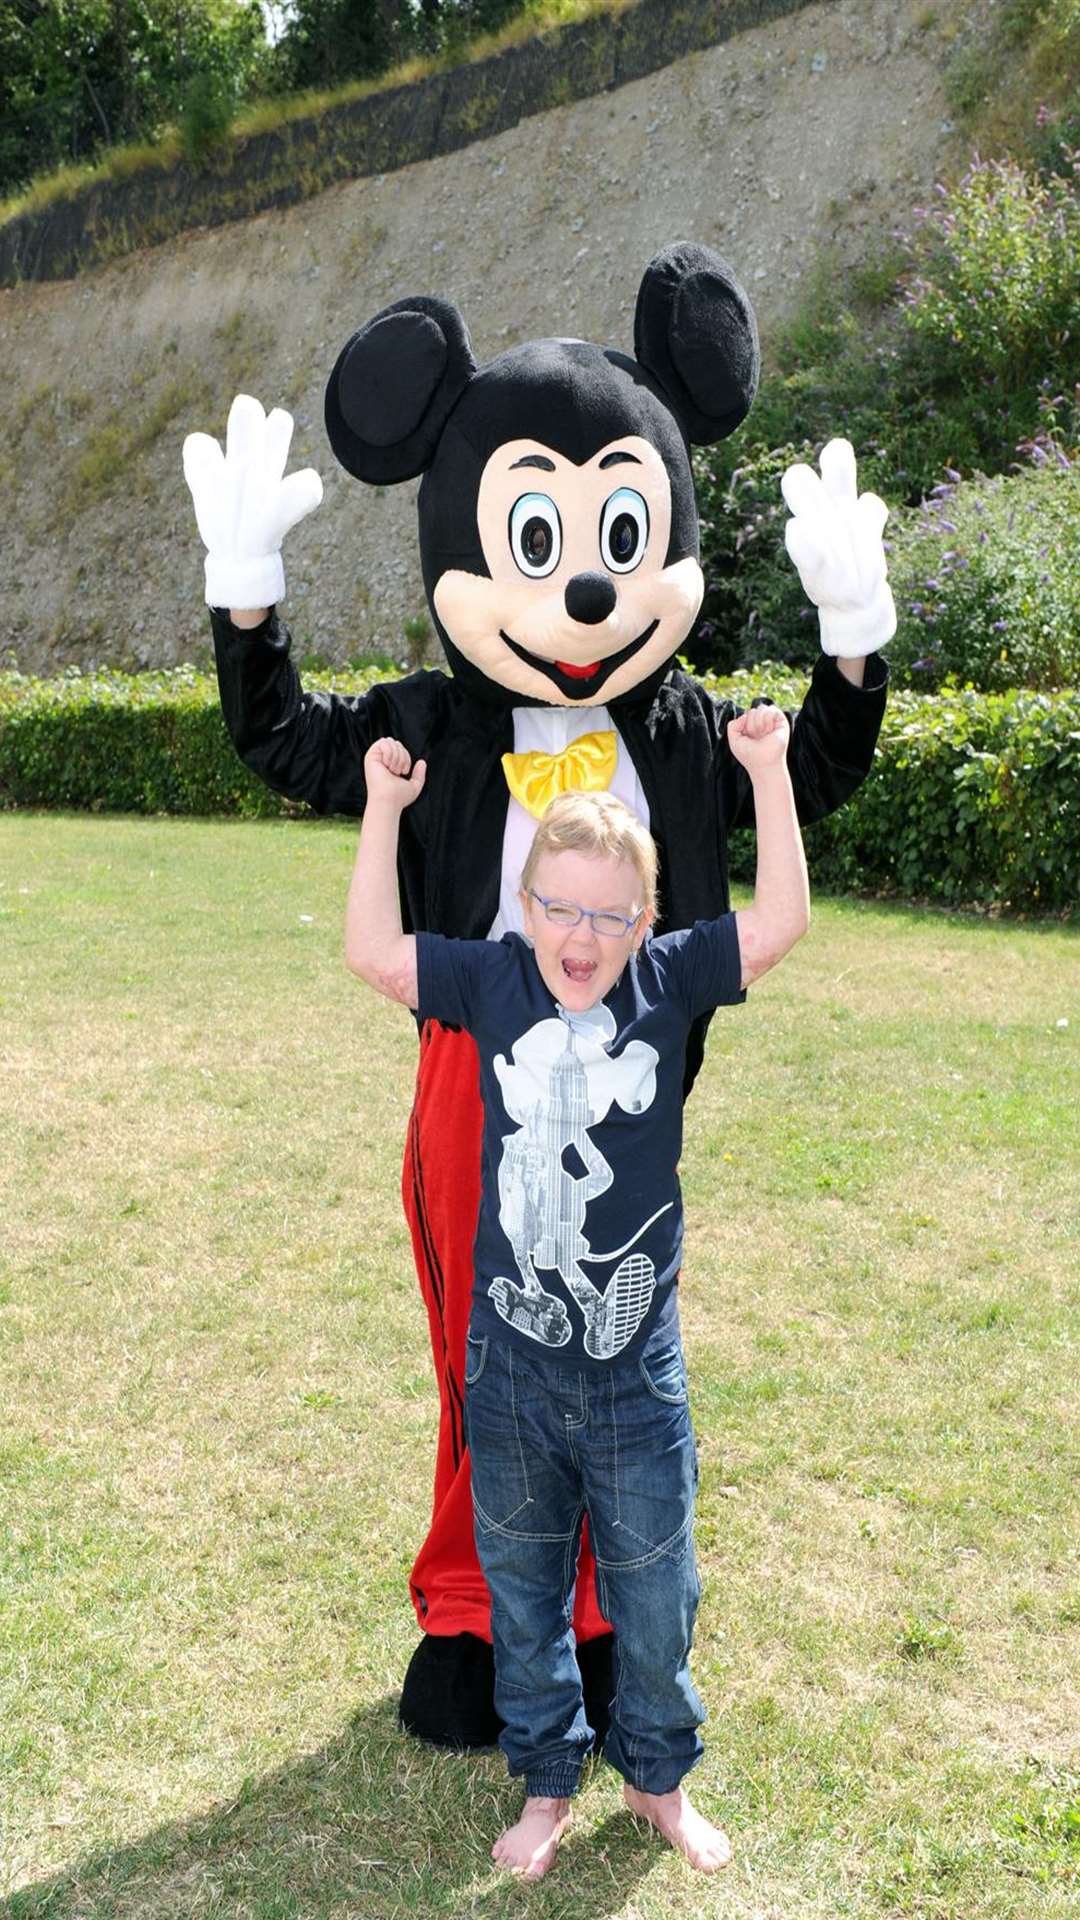 Hands up who's off to Disney World...